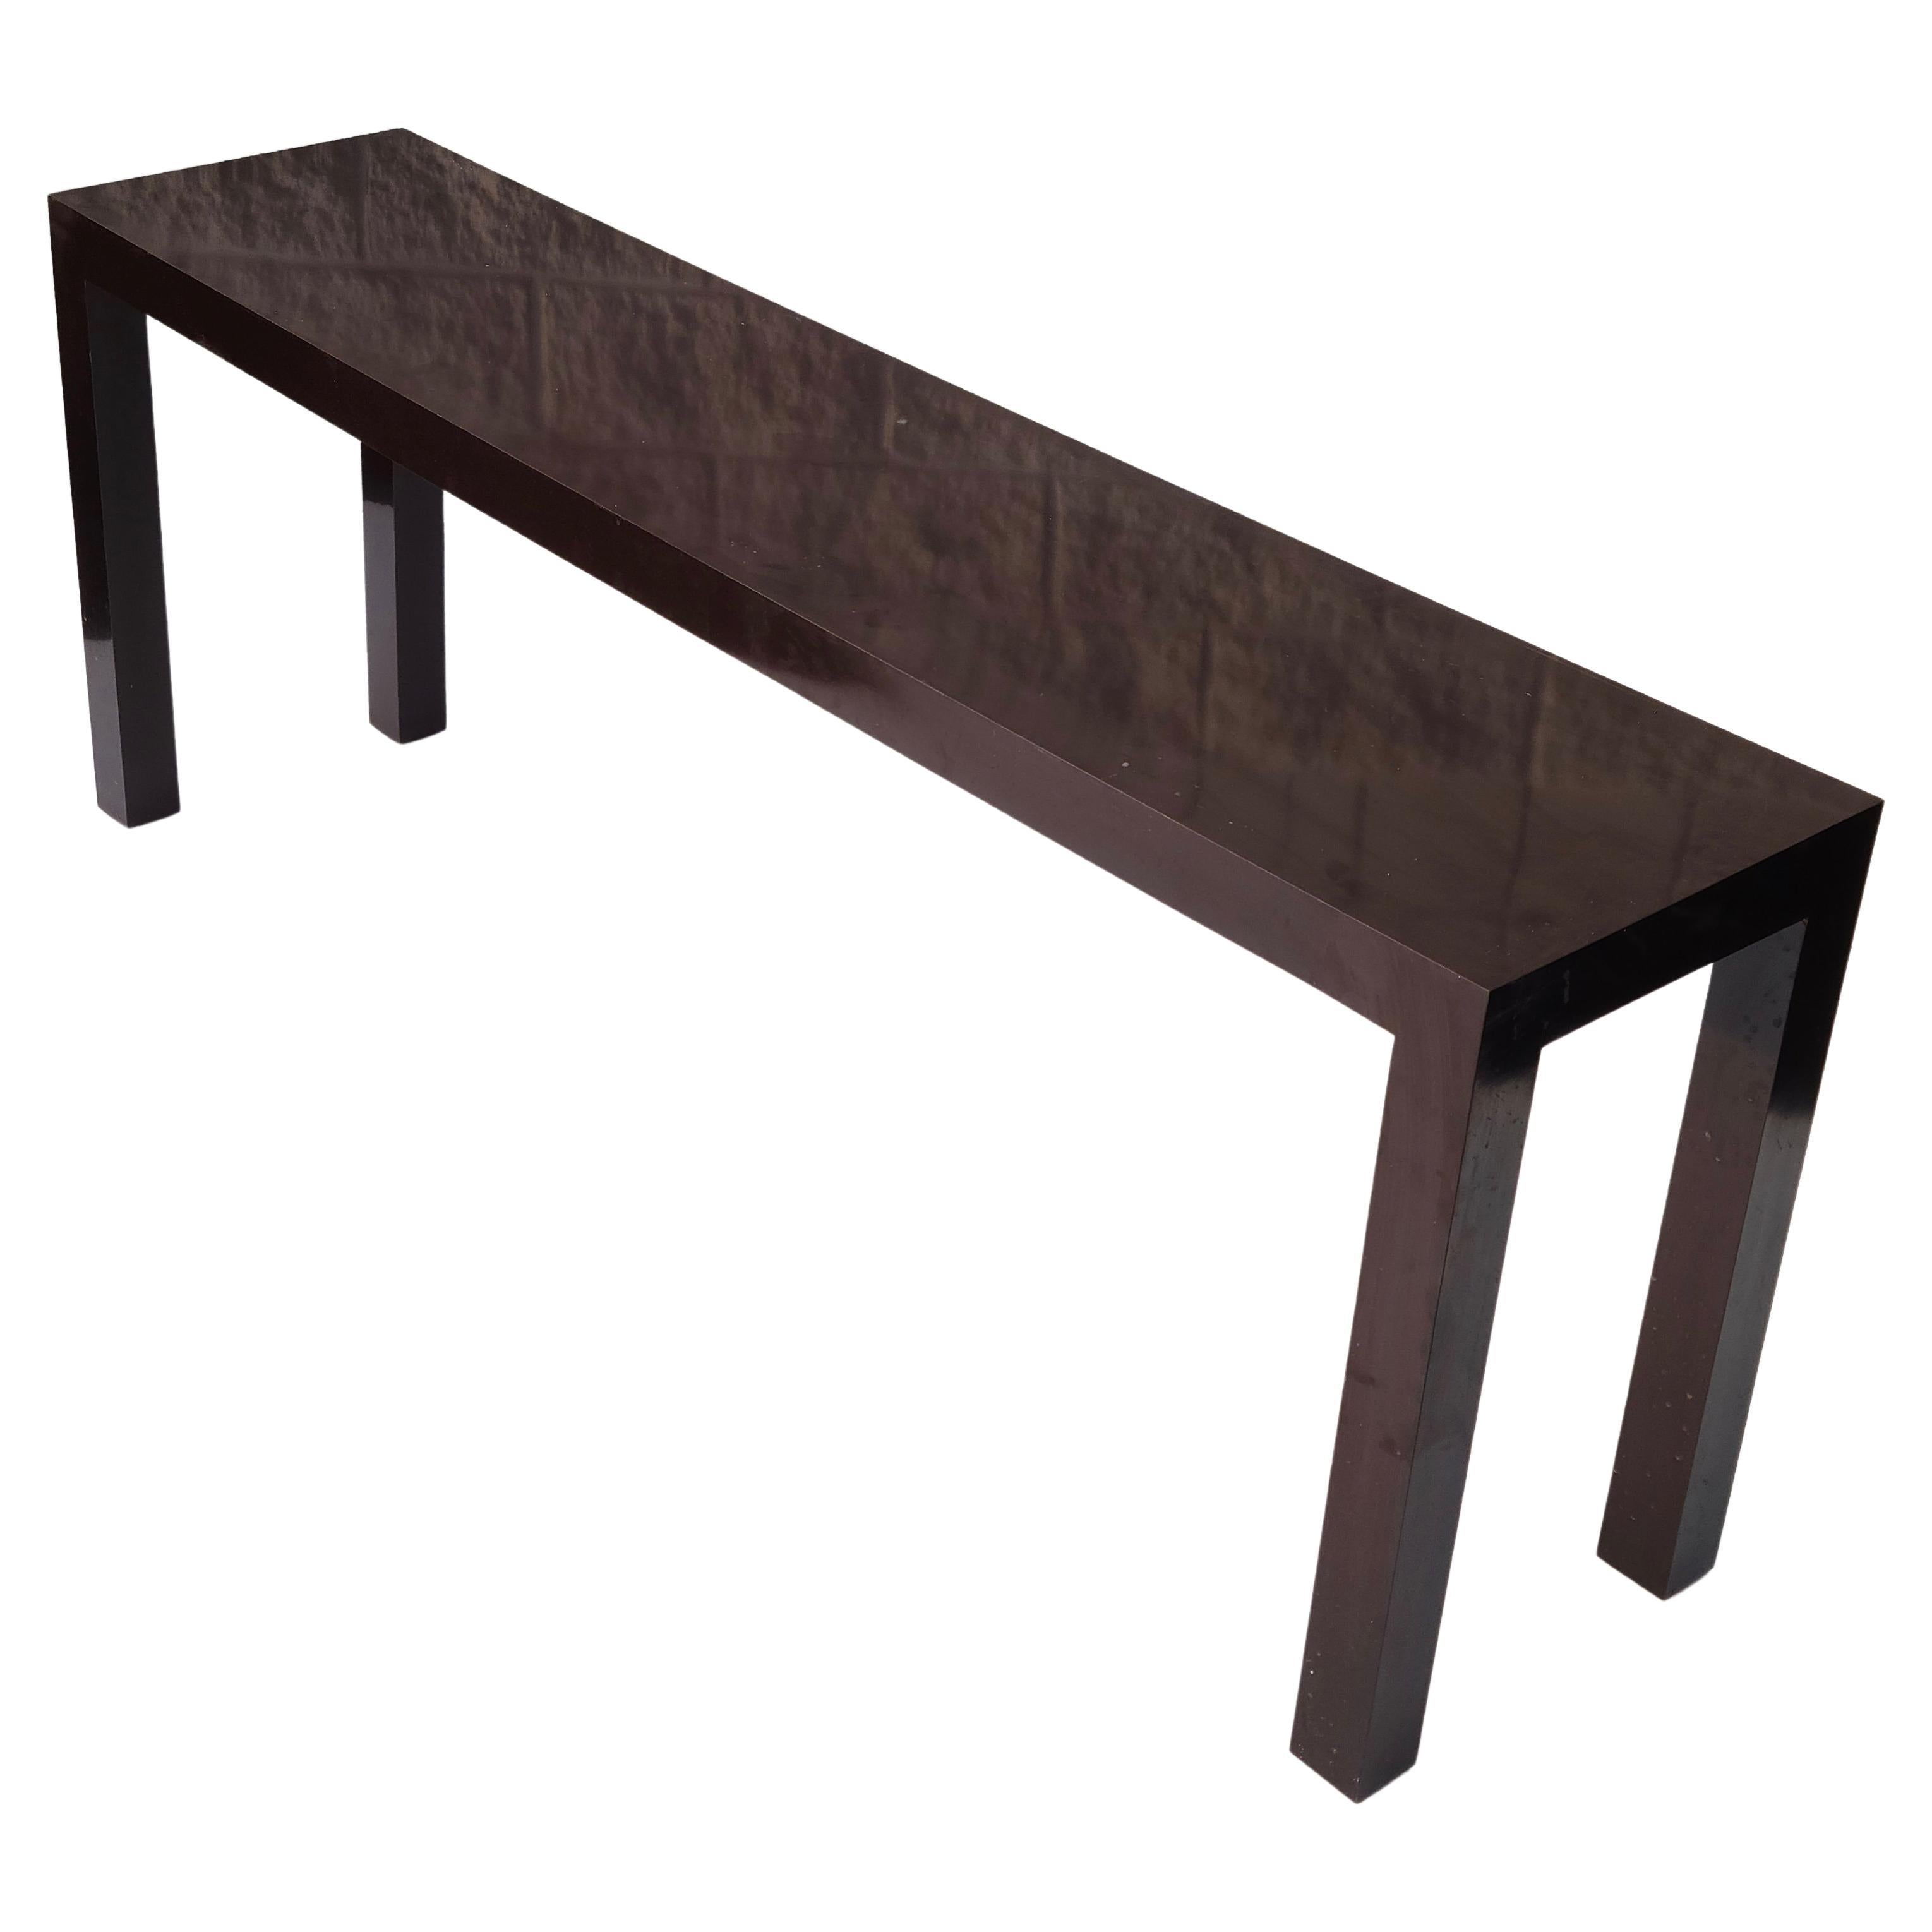 Please feel free to message for accurate shipping to your location.

Console table designed by Milo Baughman for Thayer Coggin. Plastic applique' with deep brown color.